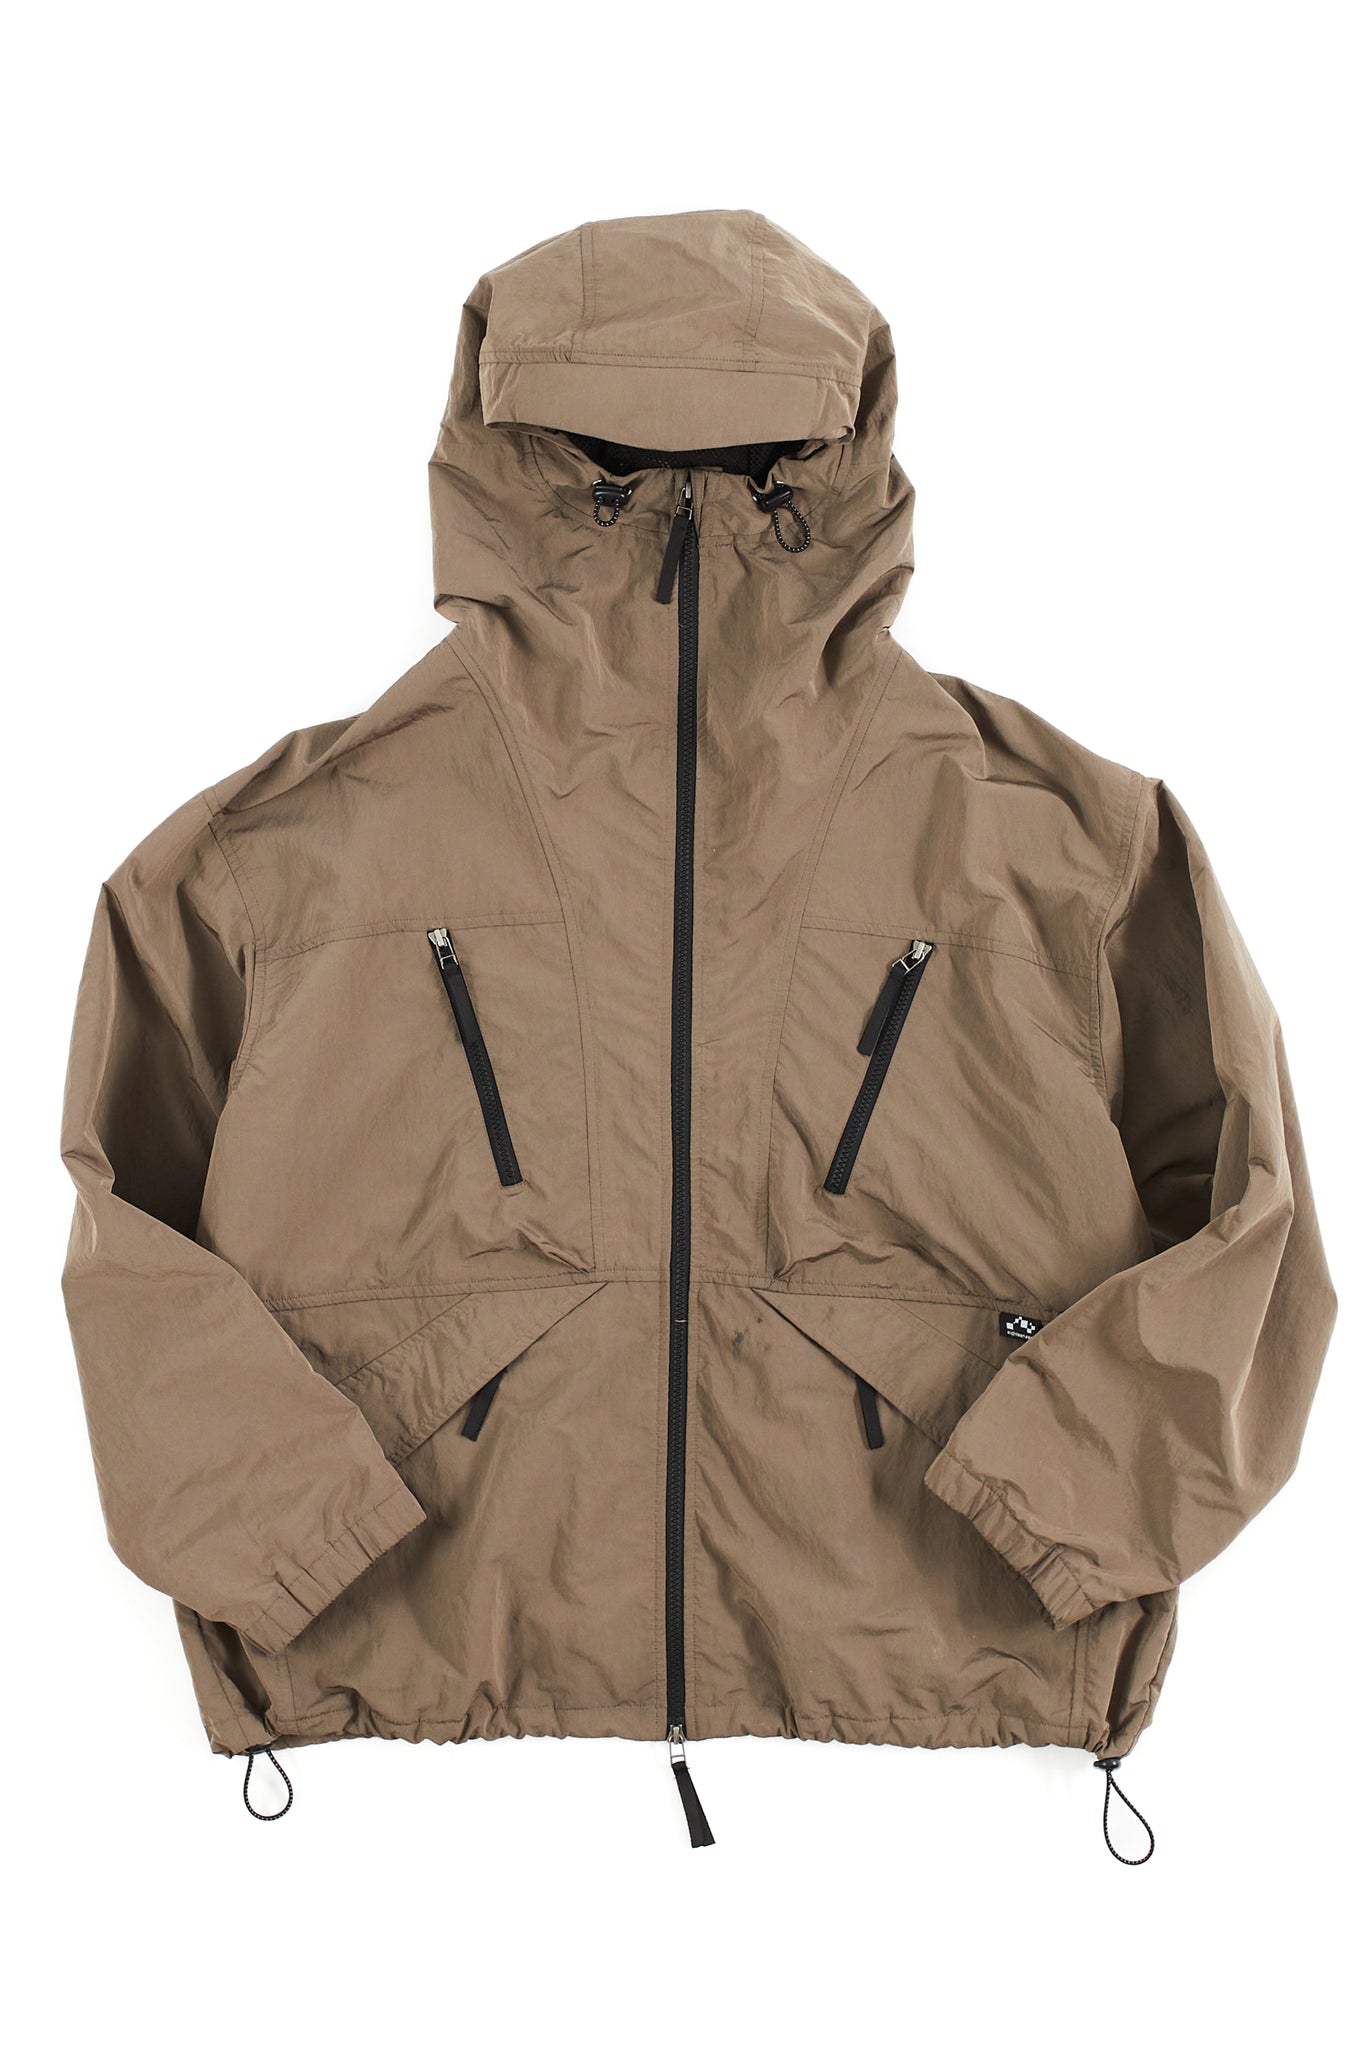 RAINSHADOW OUTDOOR PROTECTION SYSTEM HOODED SHELL - SILT WATER-REPELLENT MICRO RIPSTOP NYLON